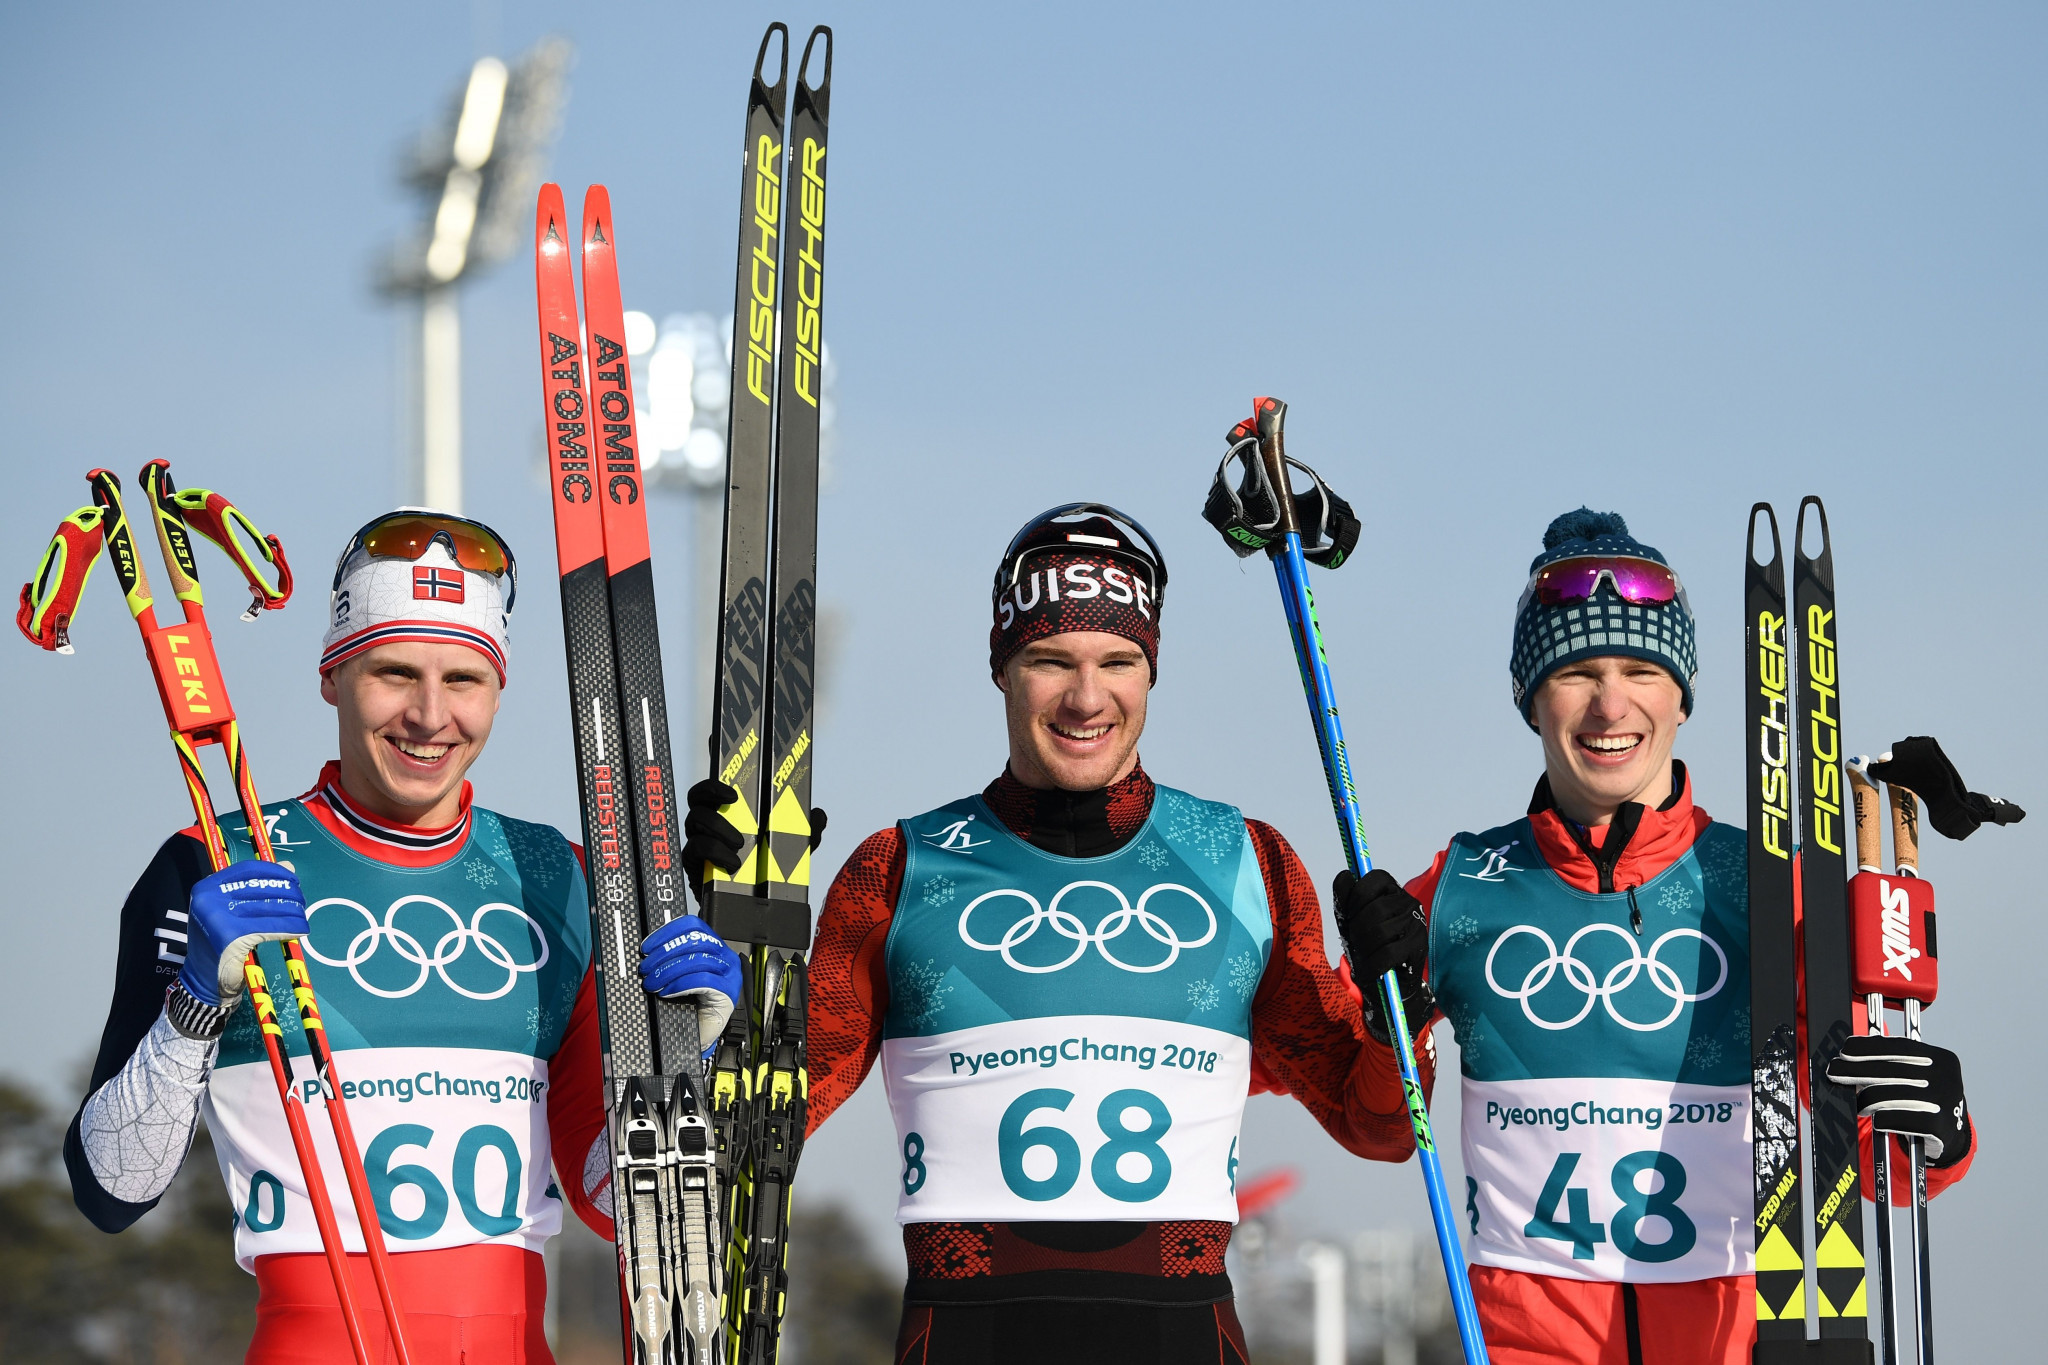 The three medal winners pose following the race today ©Getty Images